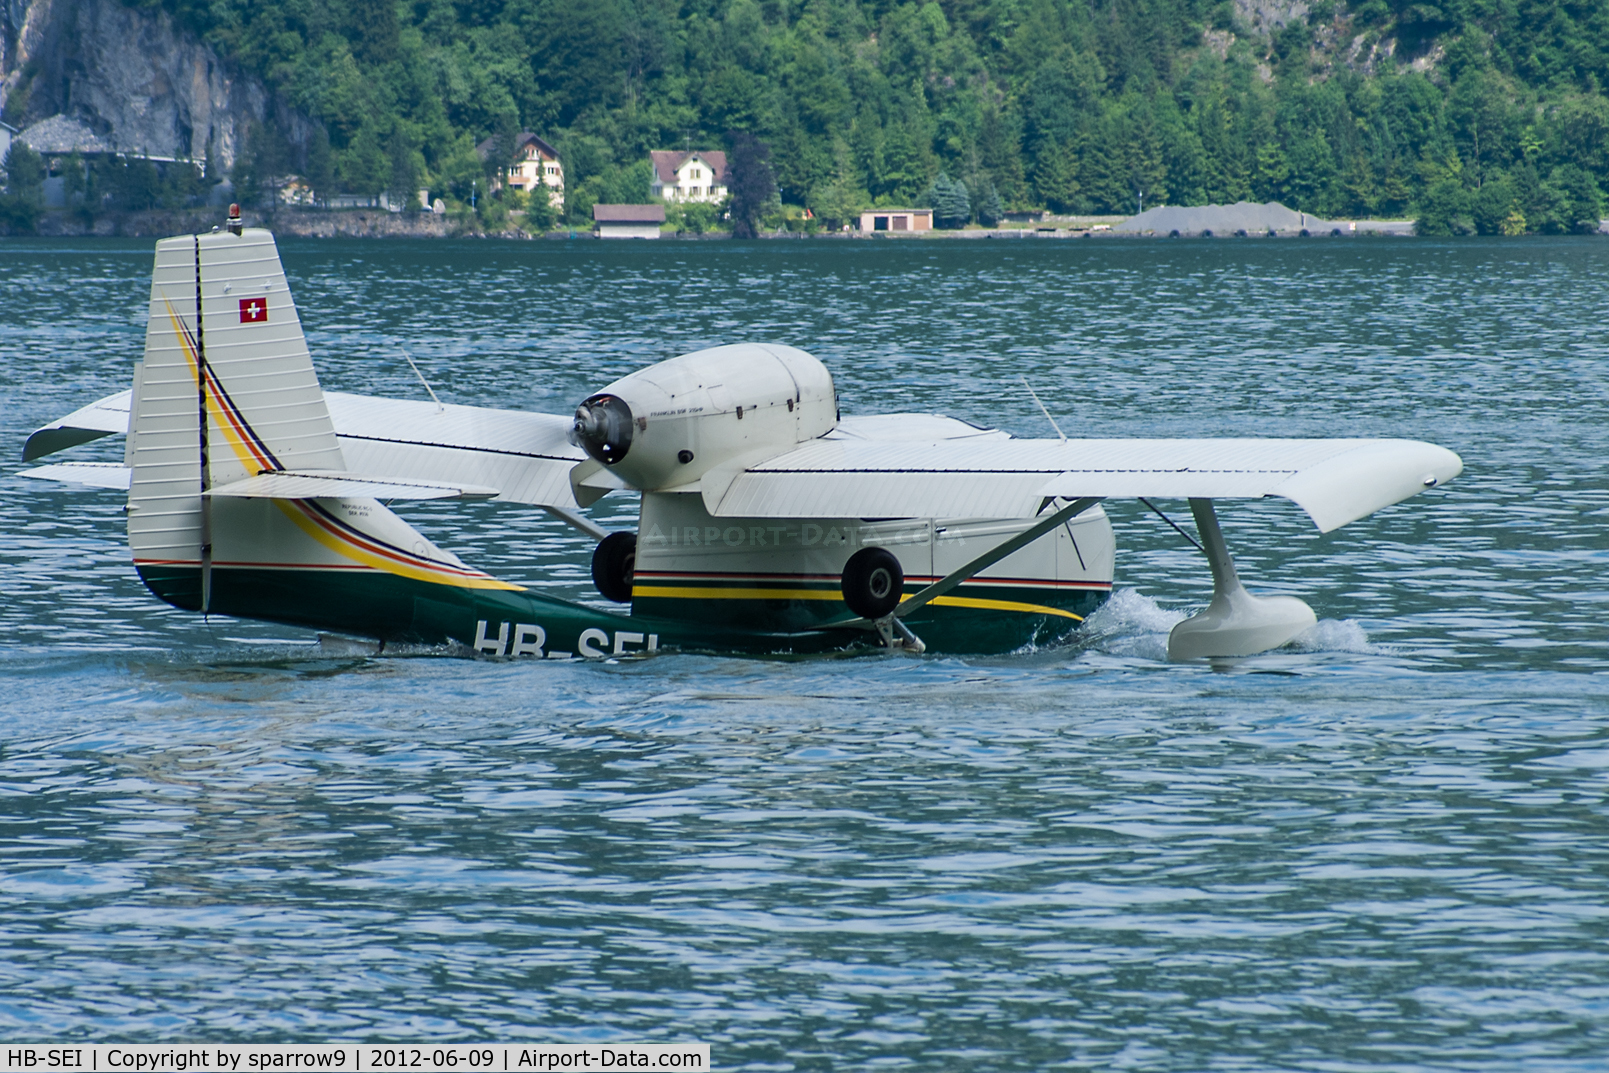 HB-SEI, 1947 Republic RC-3 Seabee C/N 936, Hergiswil/Lake of Four Cantons/Switzerland. HB-registered from 2009-12-23 until 2015-11-25.